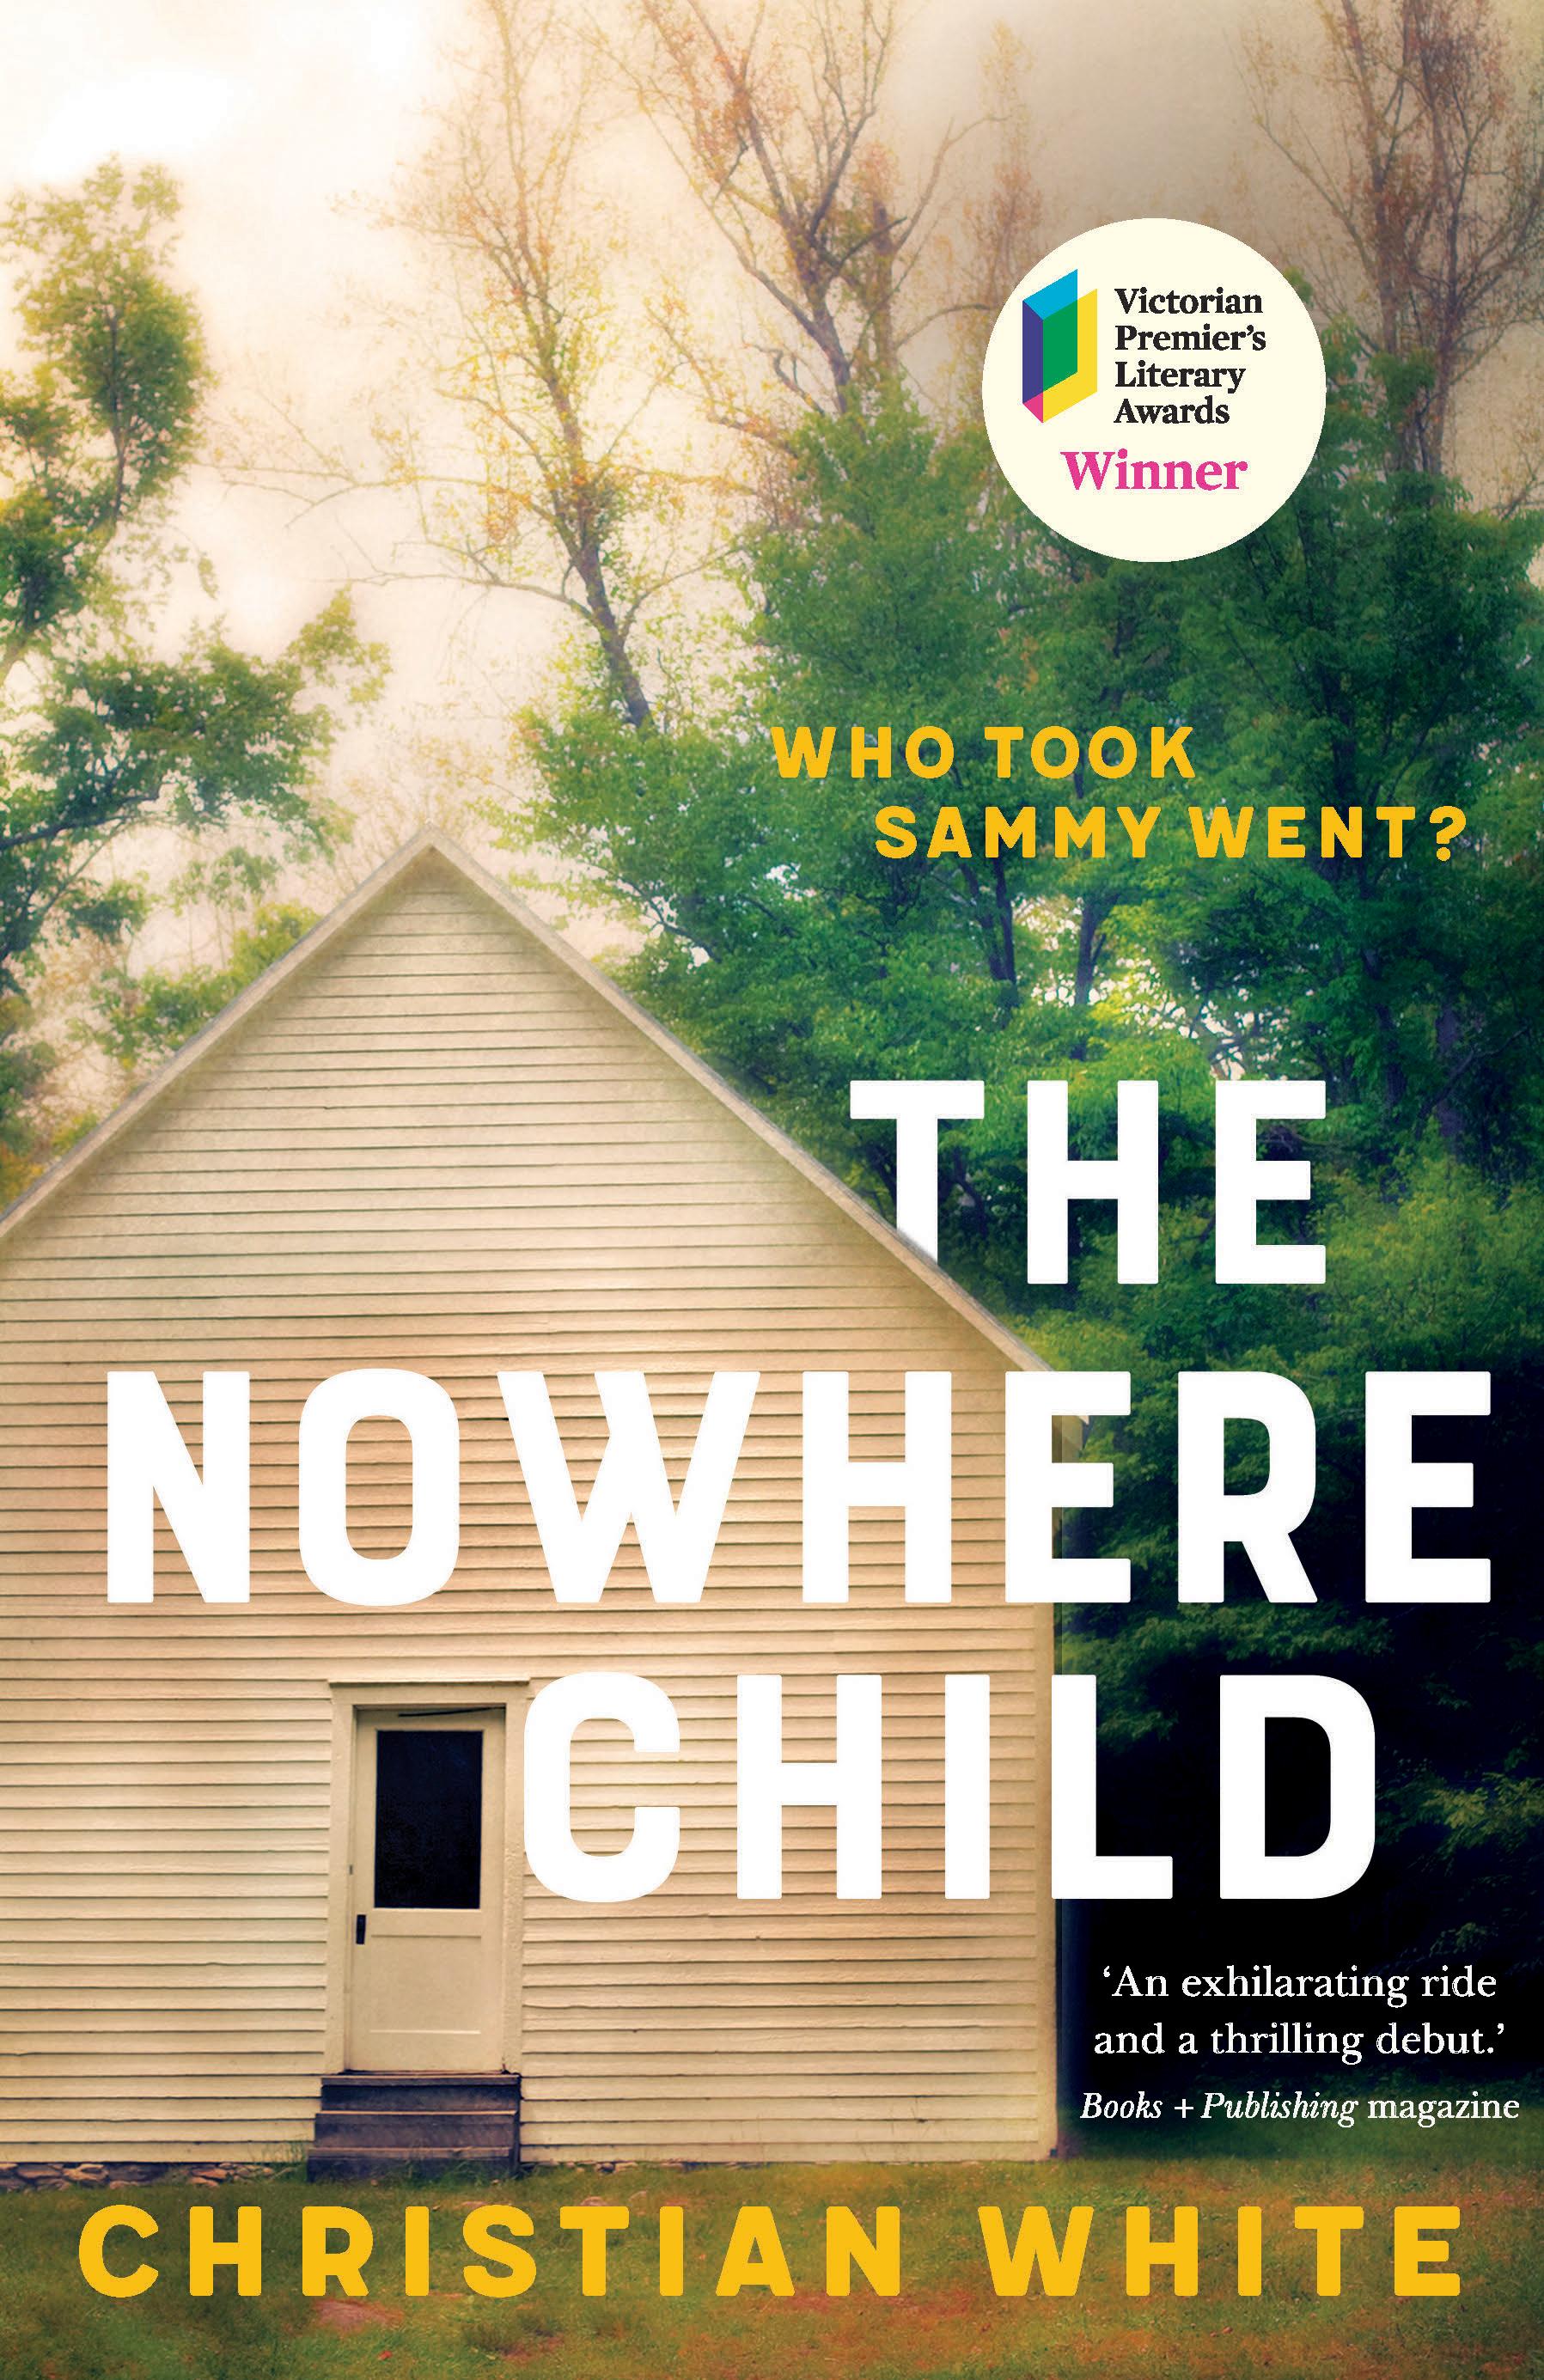 The Nowhere Child by Christian White